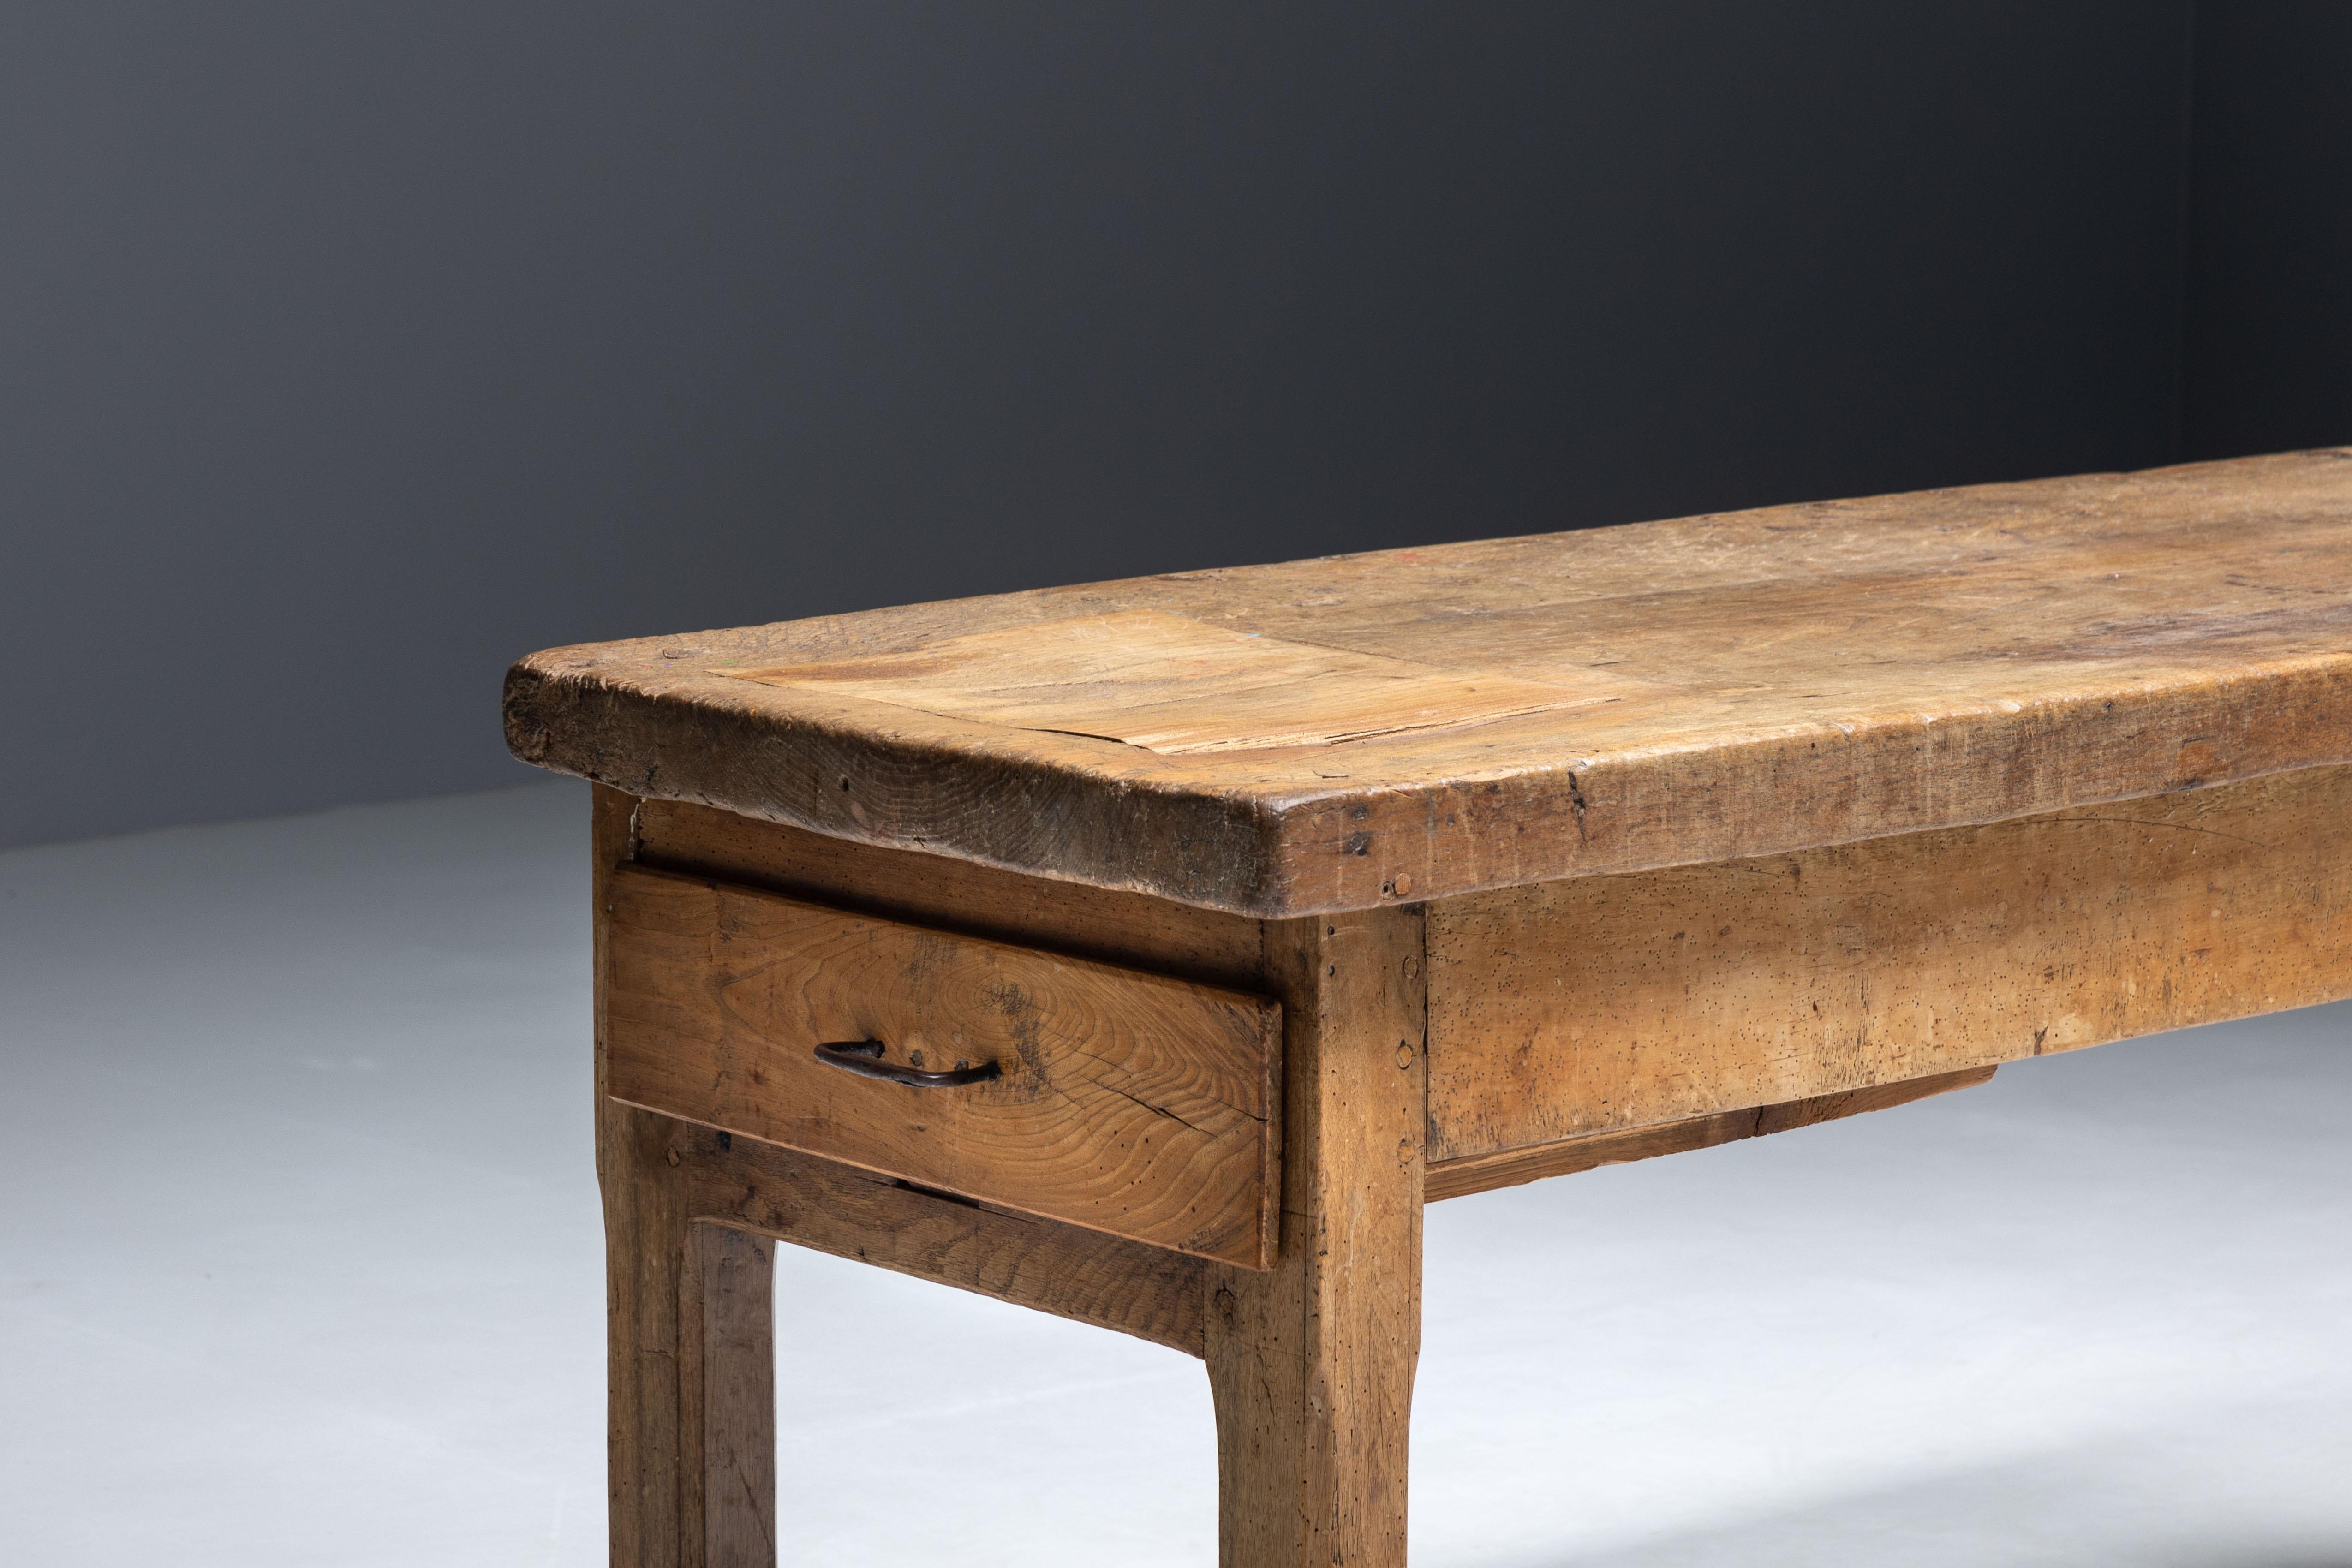 Wood Rustic Art Populaire Writing Table, France, 1900s